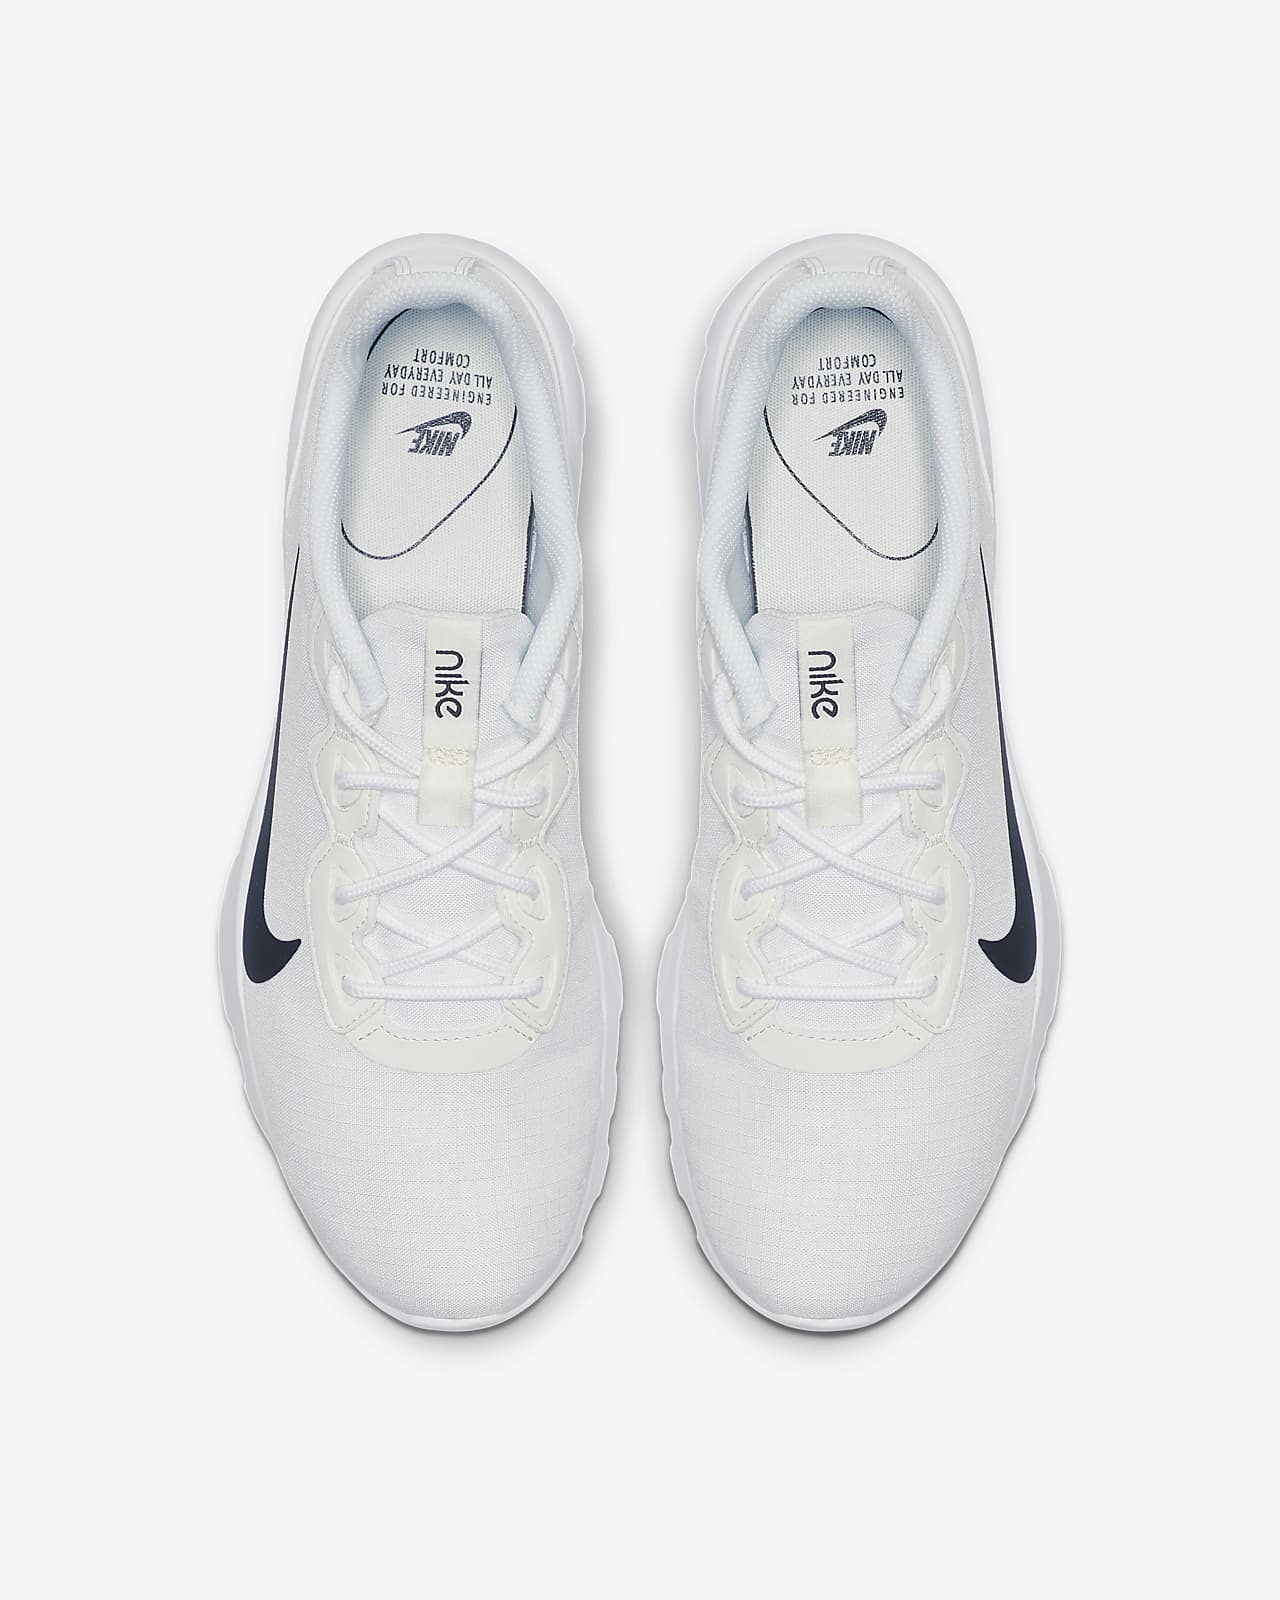 engineered for all day everyday comfort nike